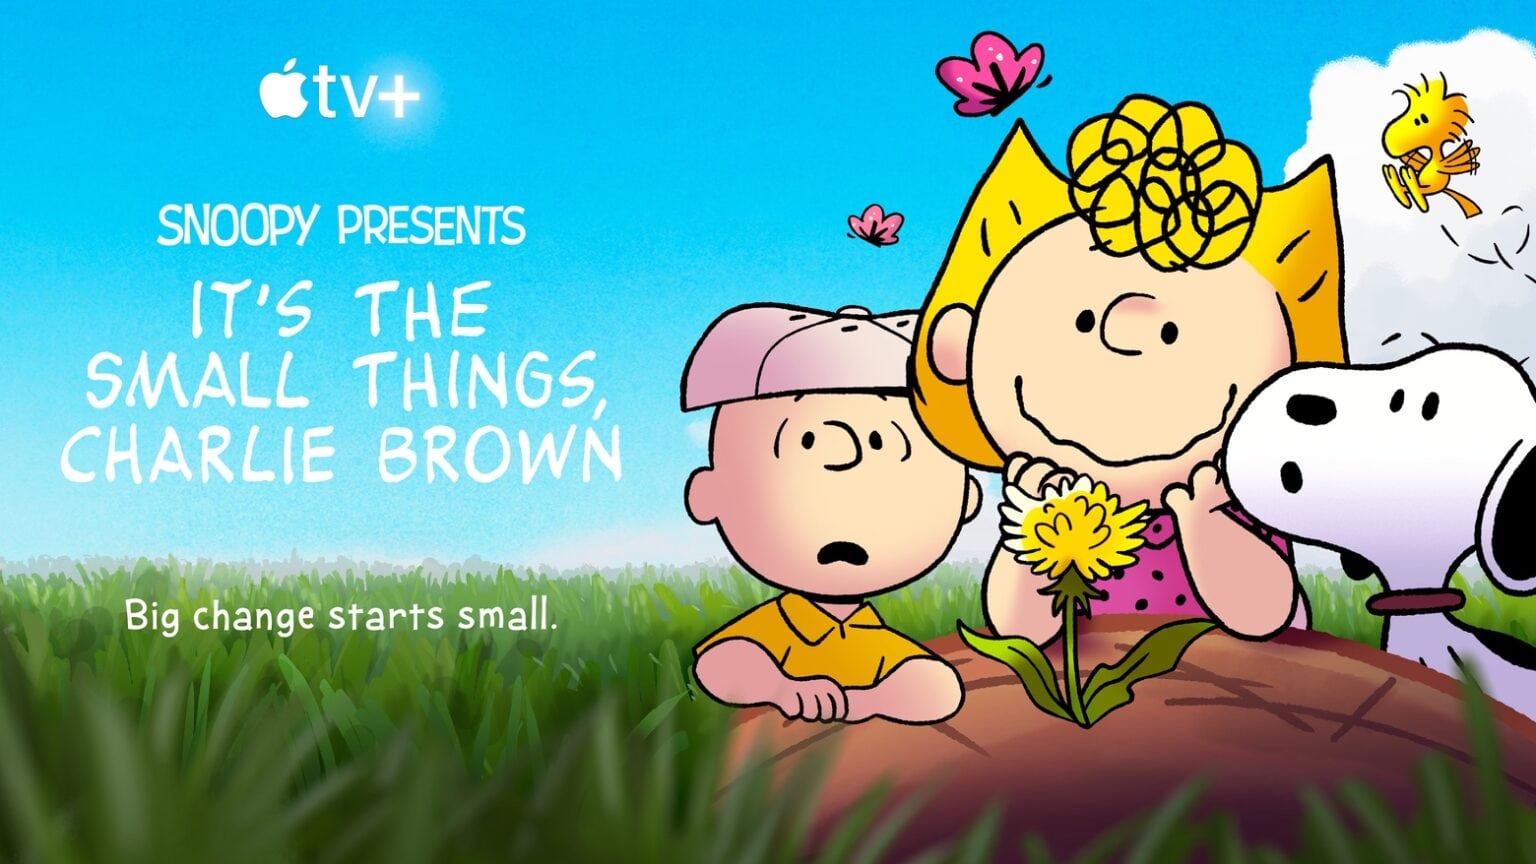 Saving a flower spurs big changes in trailer for Peanuts Earth Day special